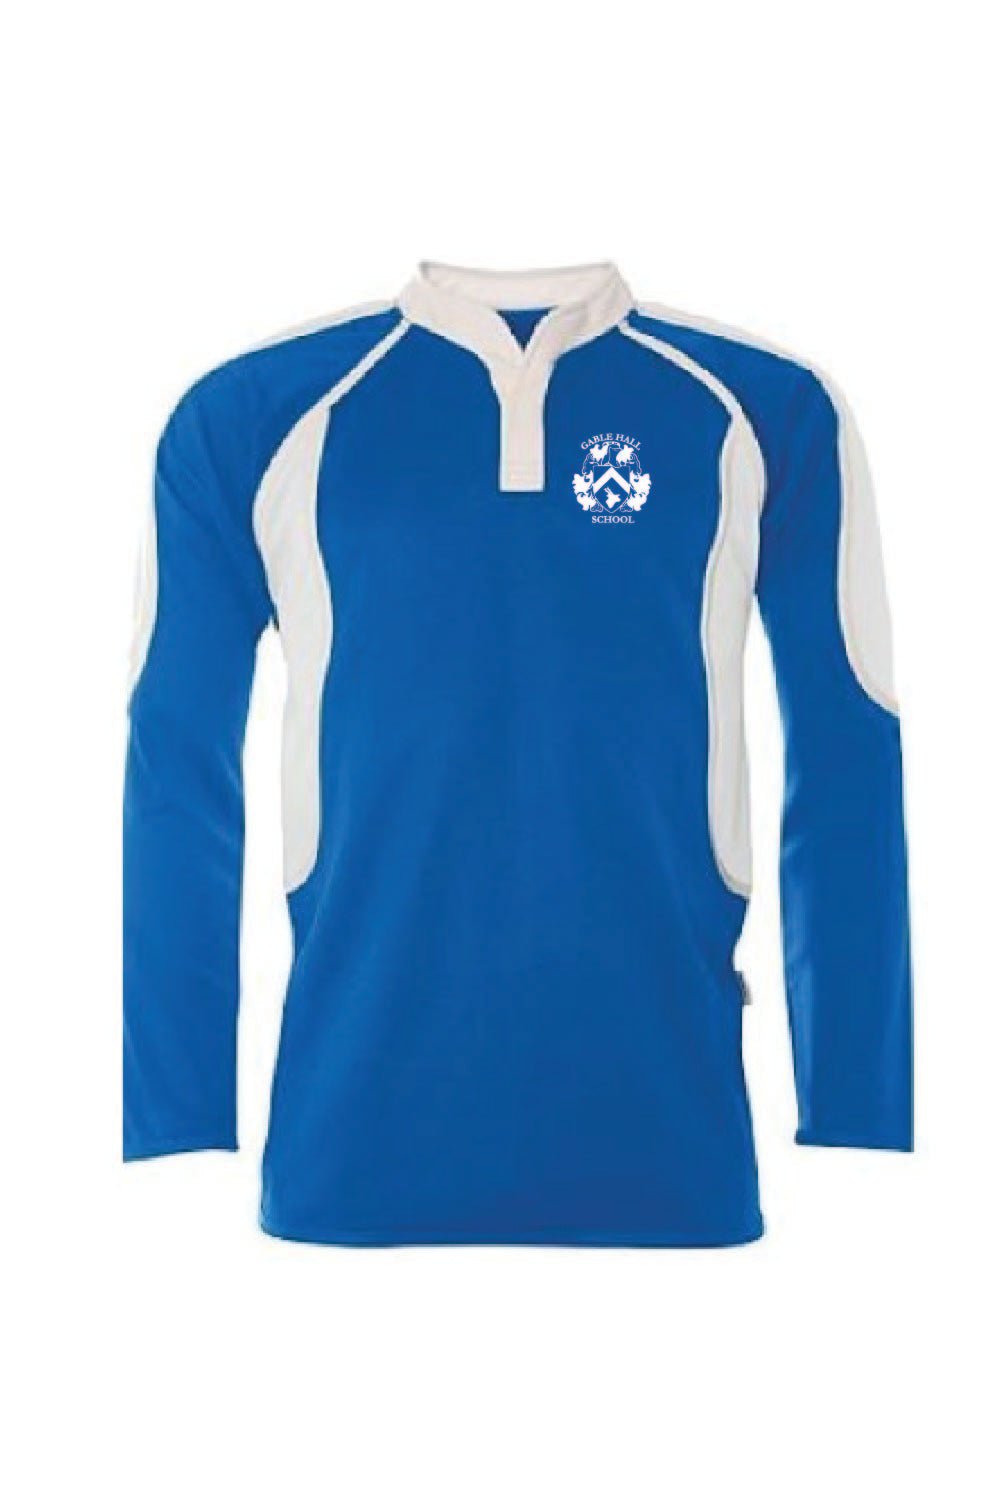 Gable Hall Rugby Top - Uniformwise Schoolwear